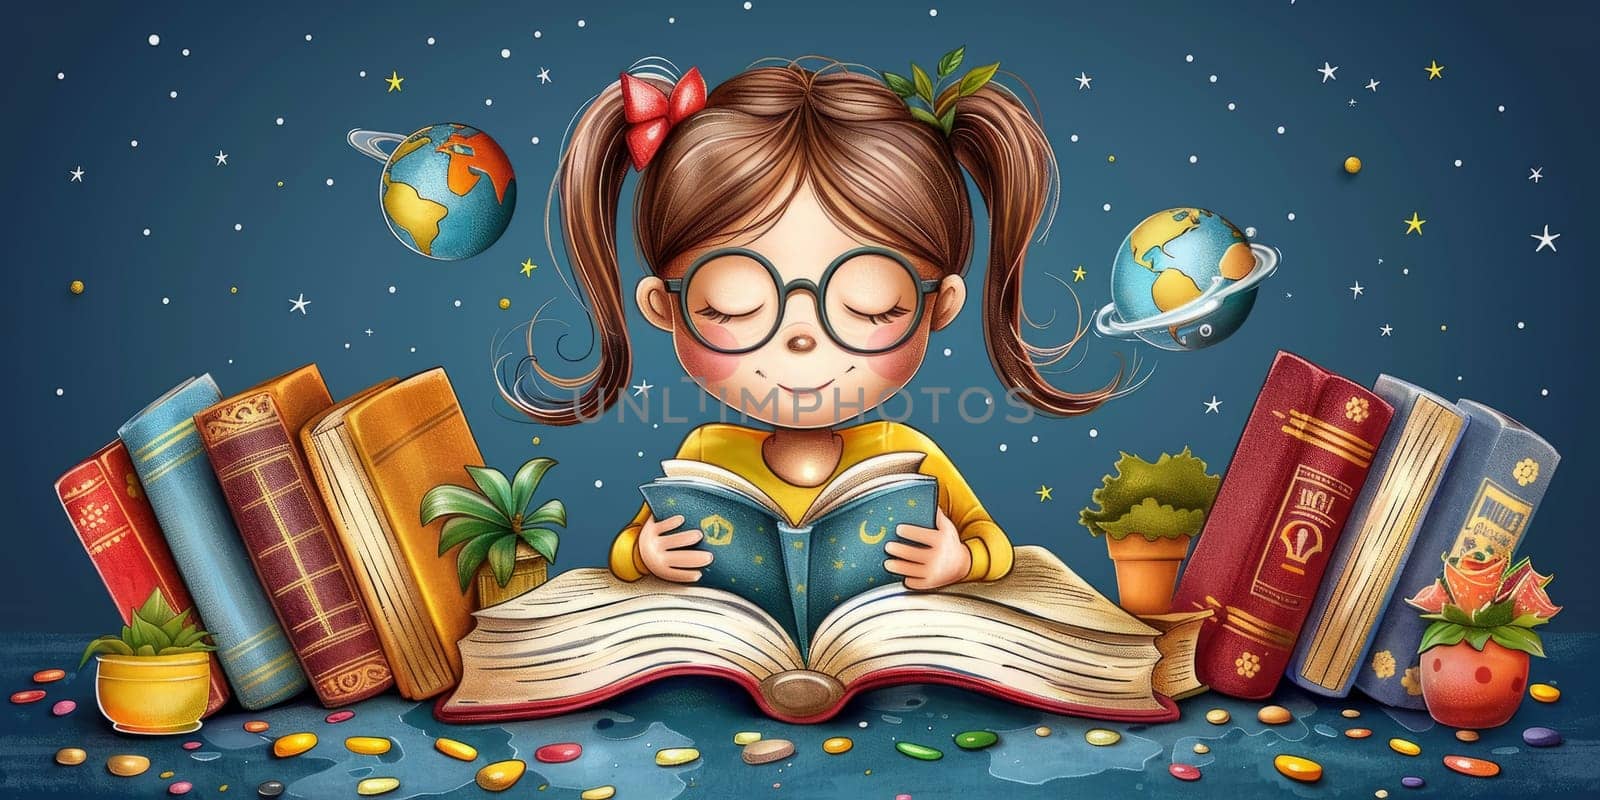 Imaginative Girl Reading Book with Magical World Emerging from Pages. Concept of Childhood Reading, Imagination, and Love for Literature.